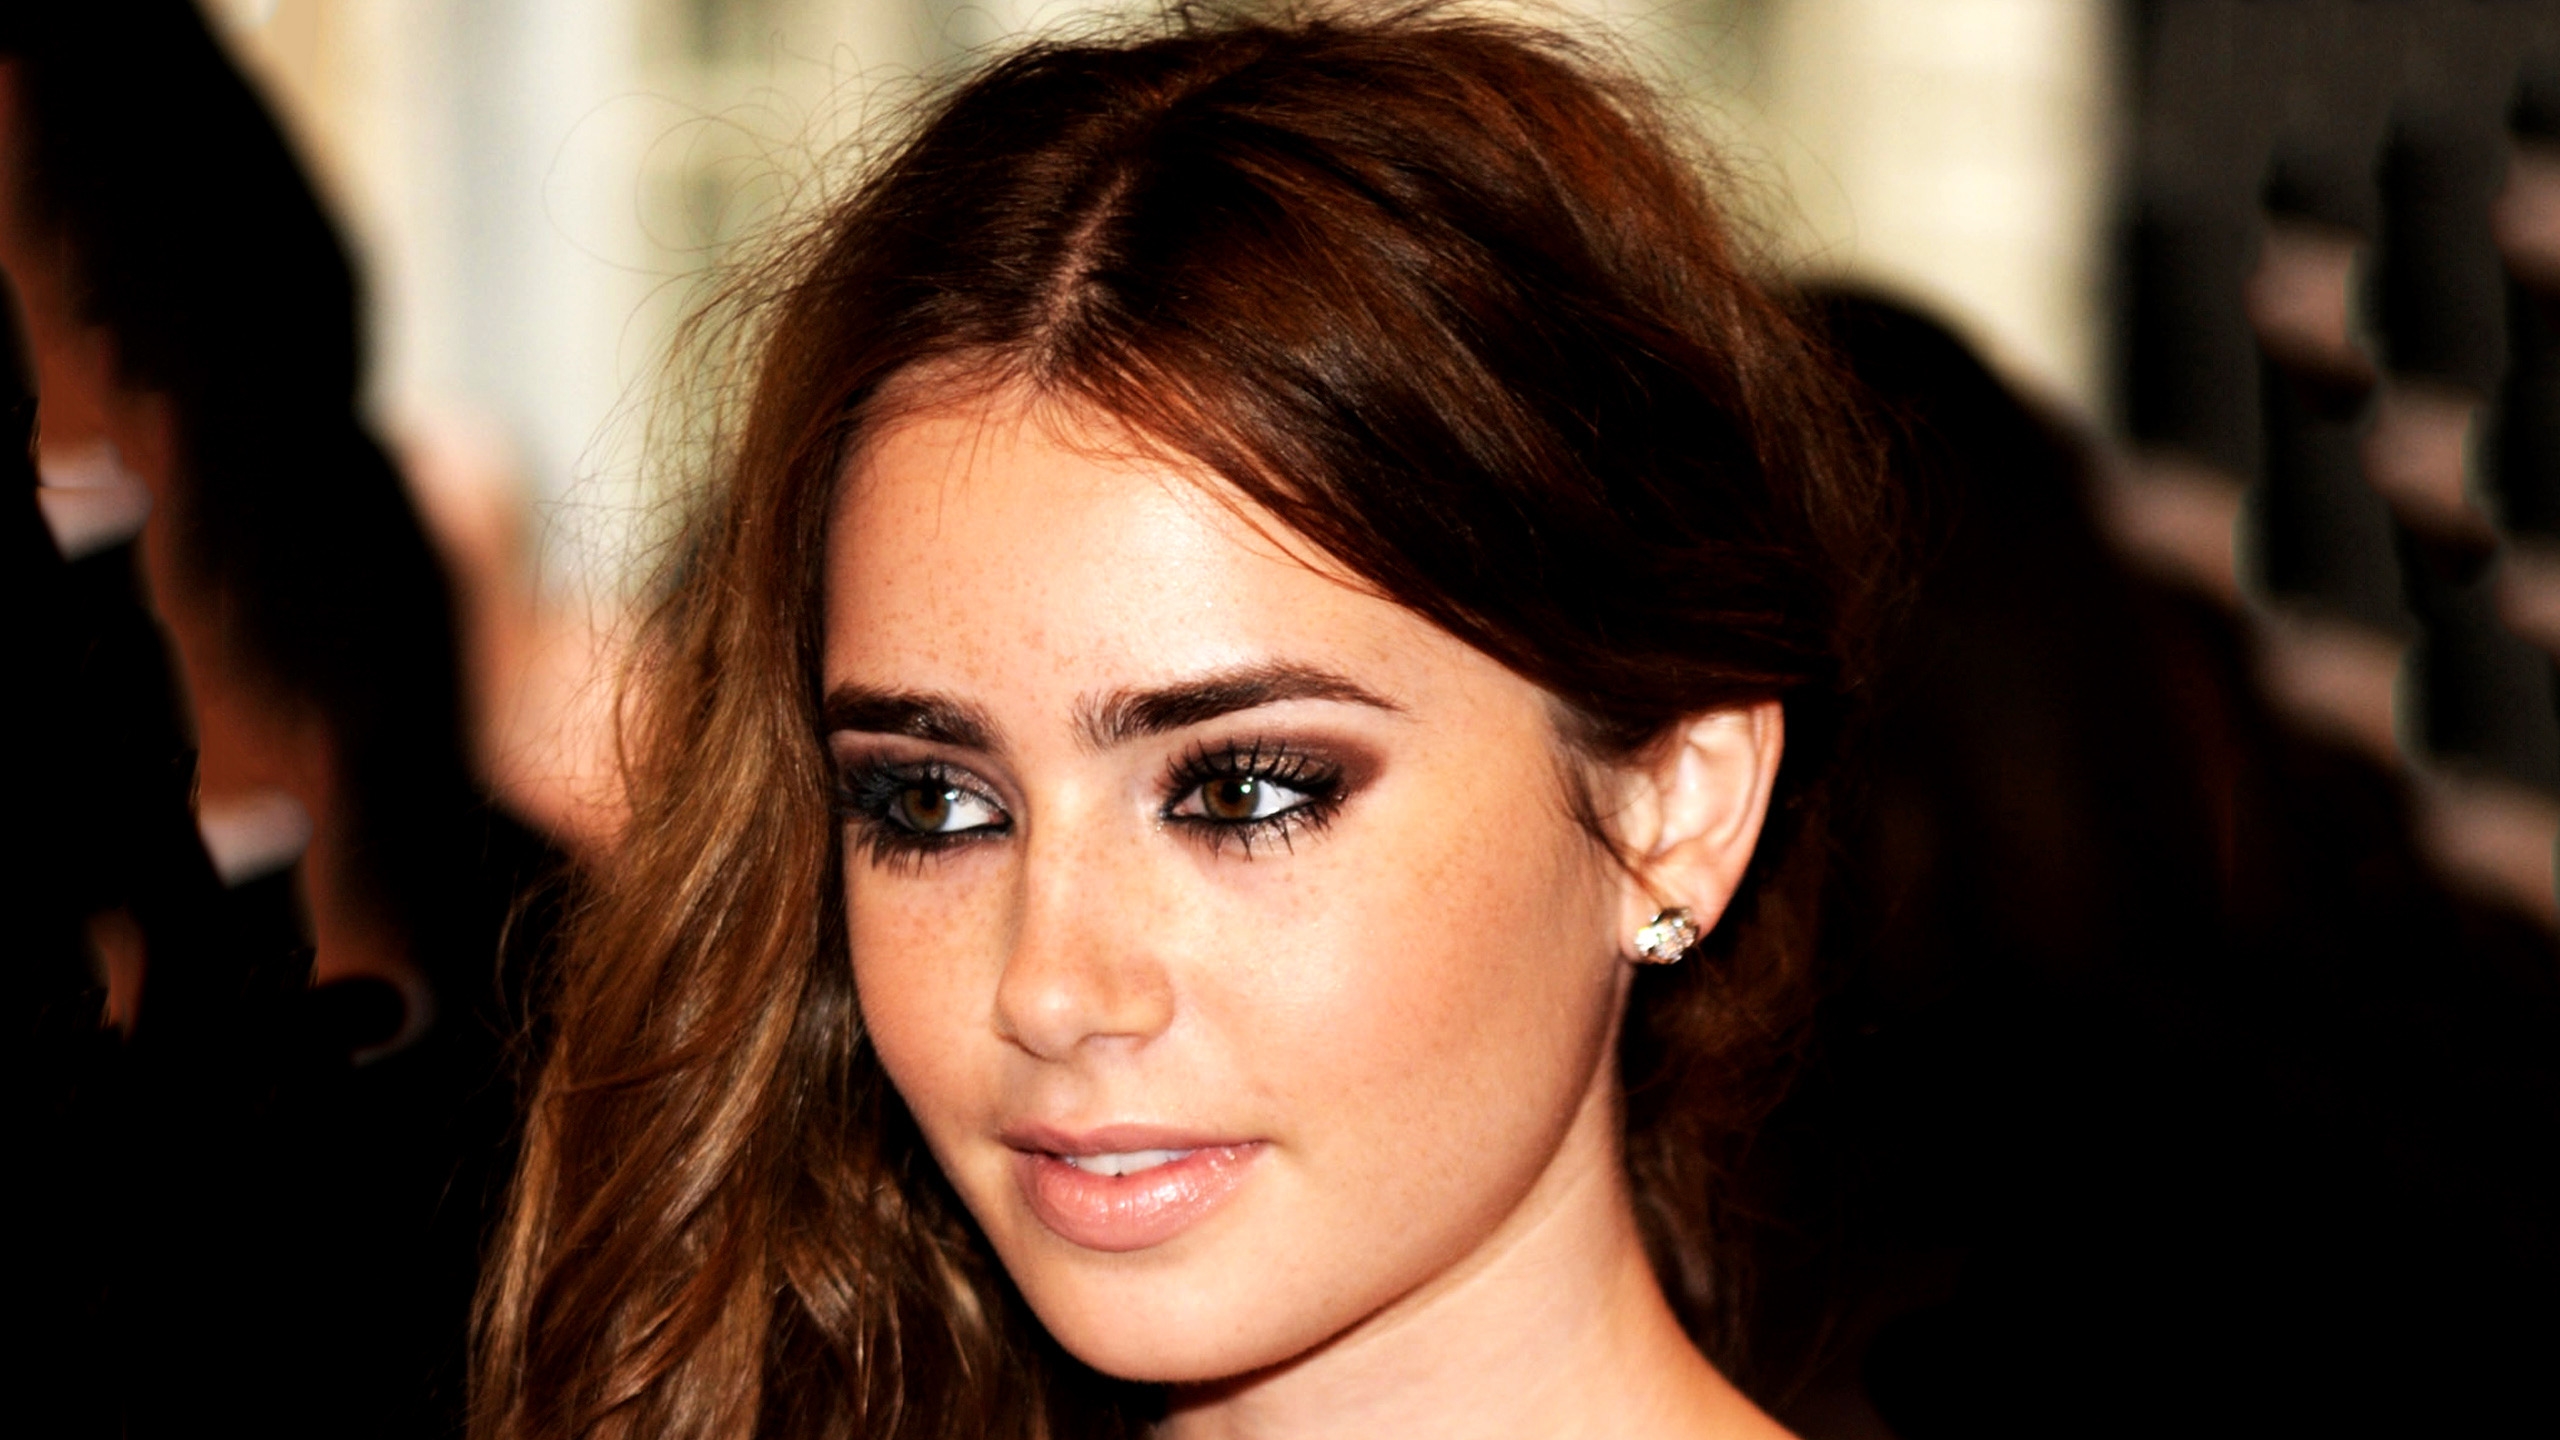 Lily Jane Collins for 2560x1440 HDTV resolution